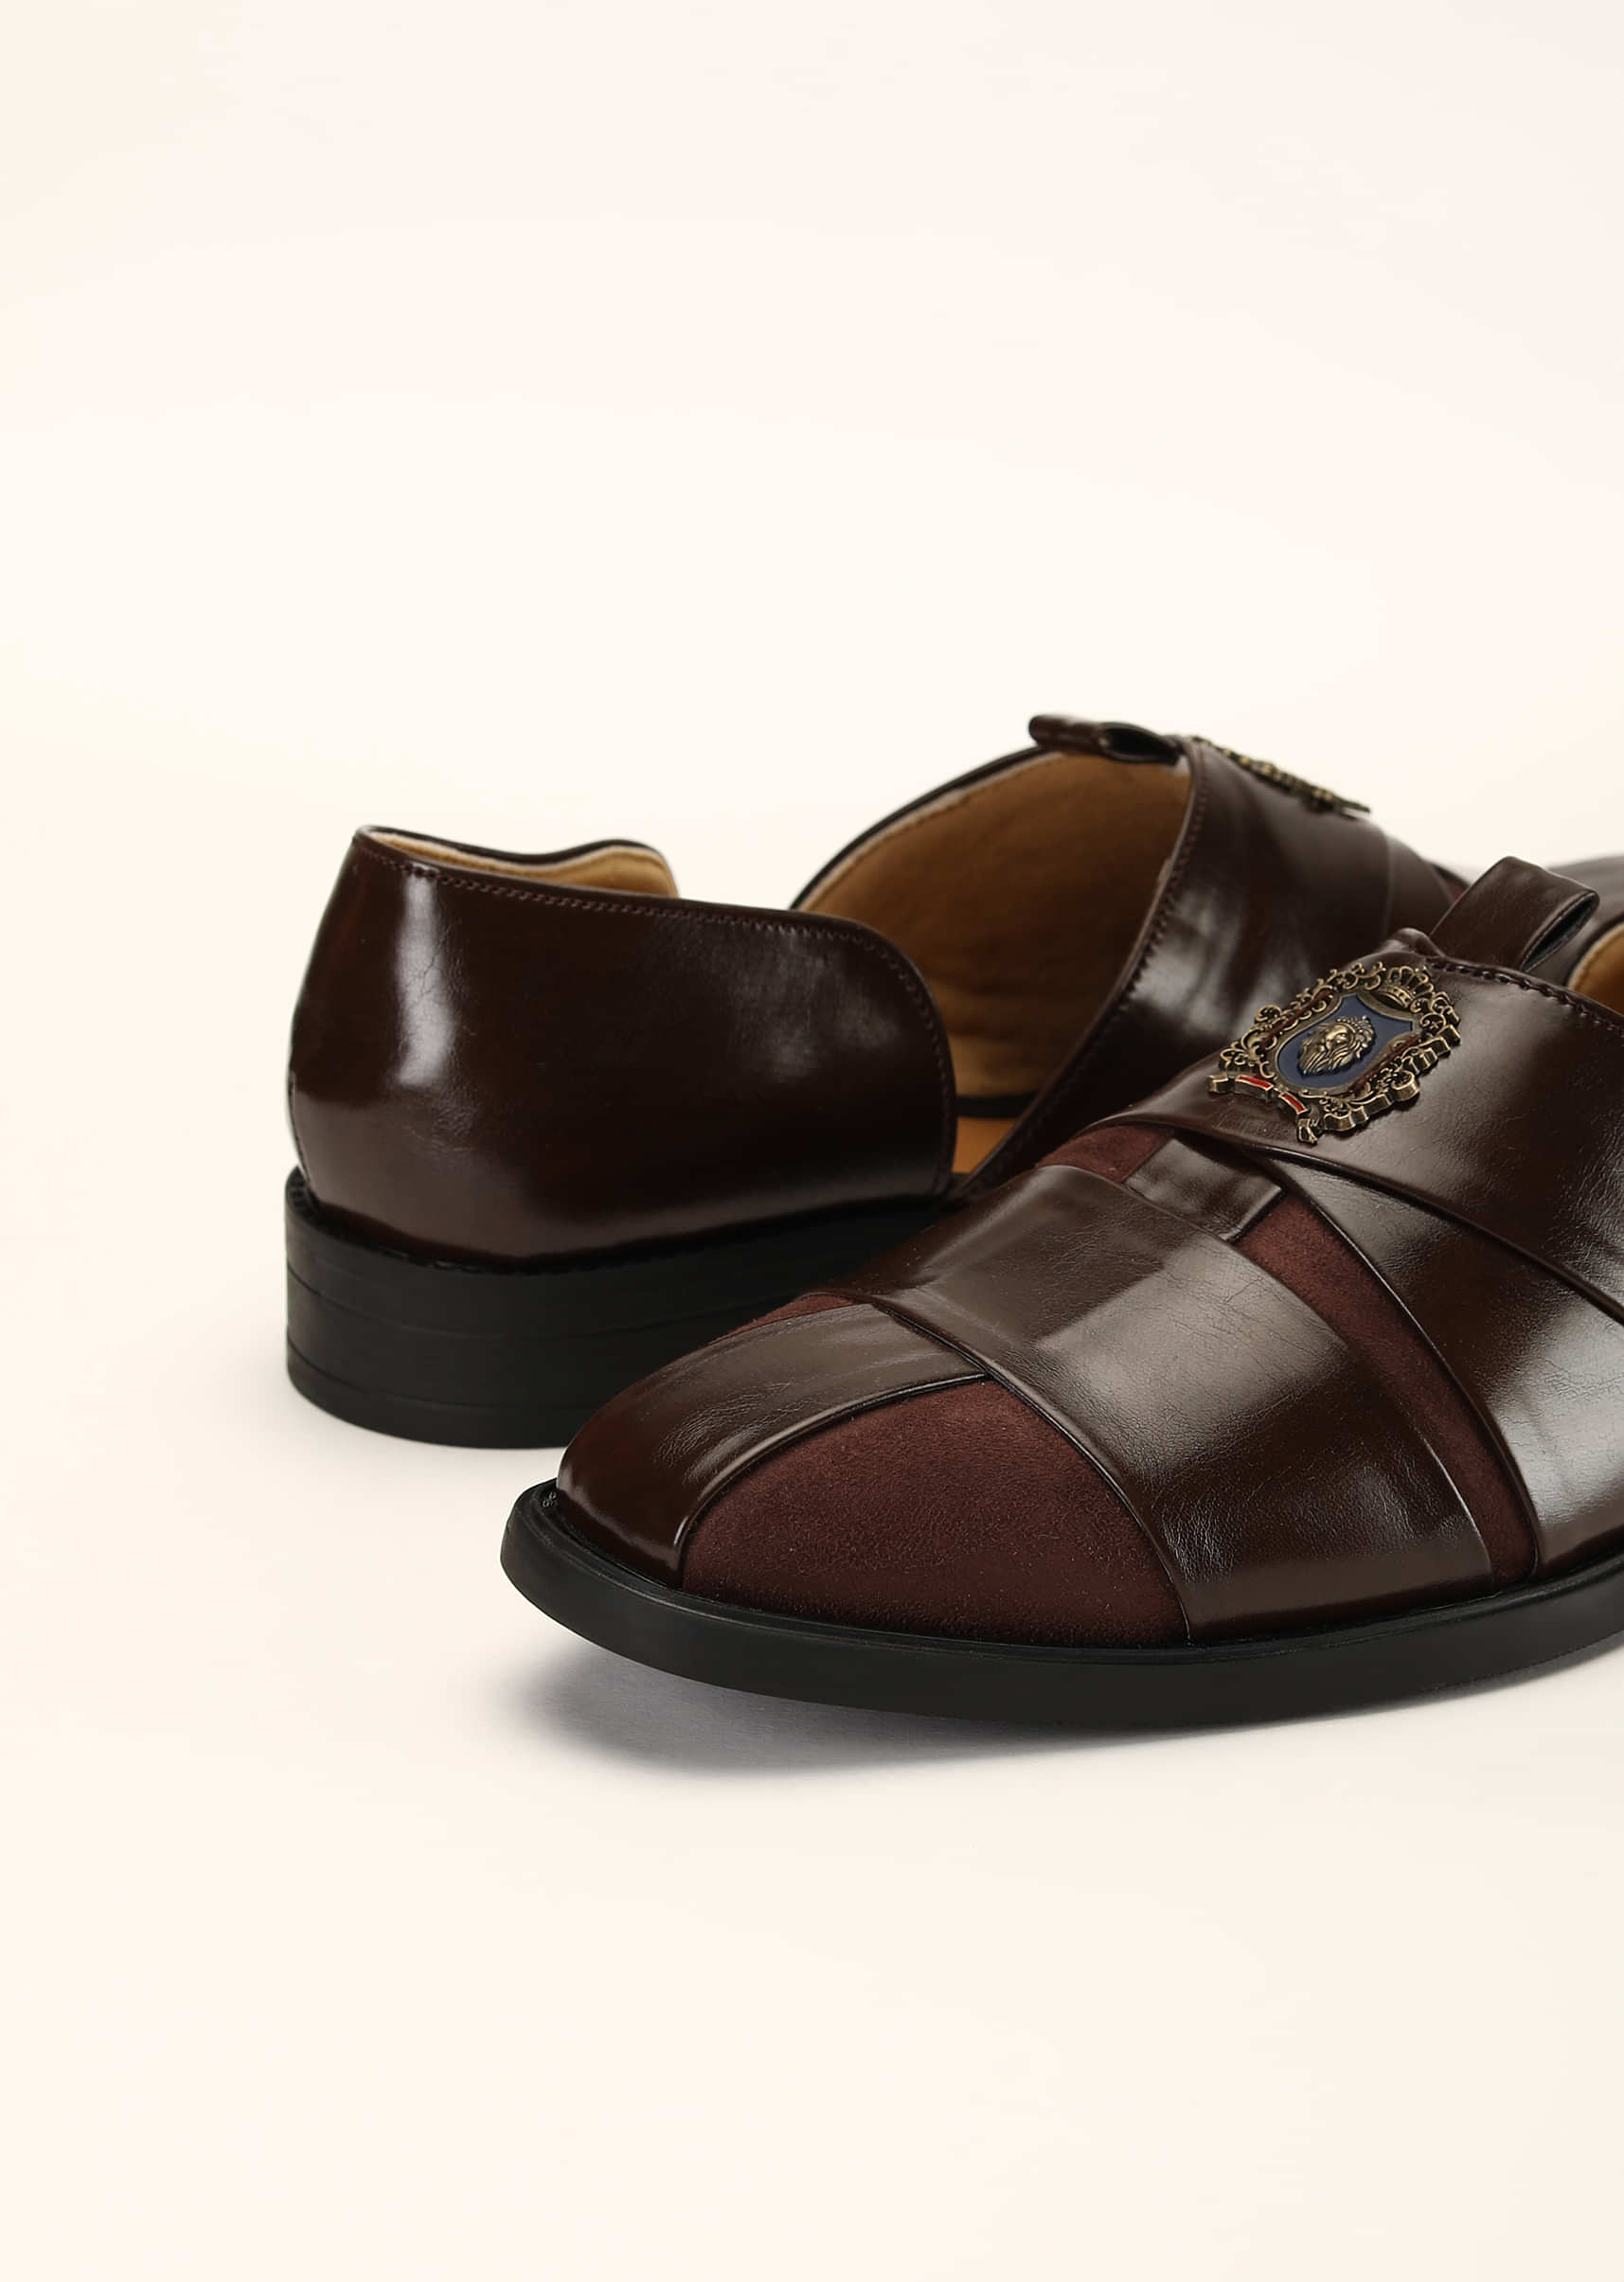 Brown Peshawari Footwear In Rexine And Suede Leather Embellished With A Brooch